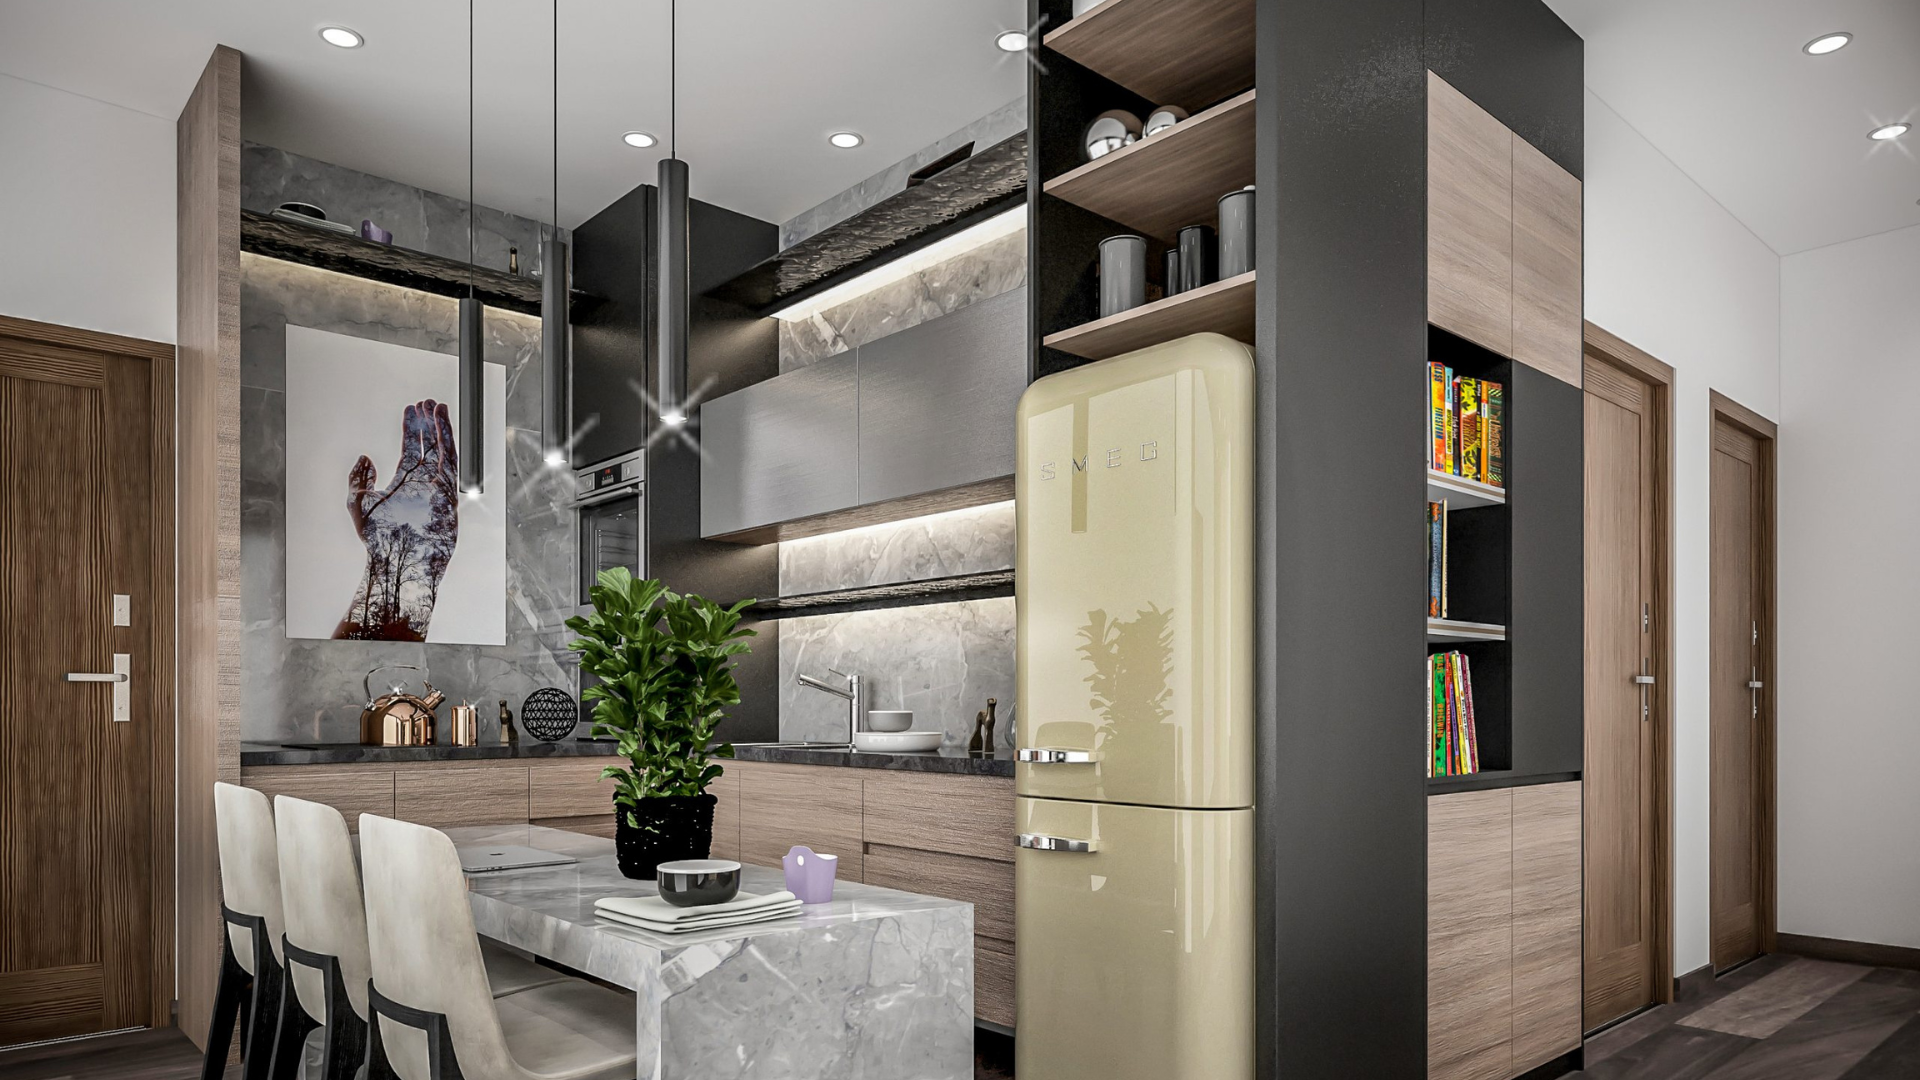 1 And 2 bed apartments